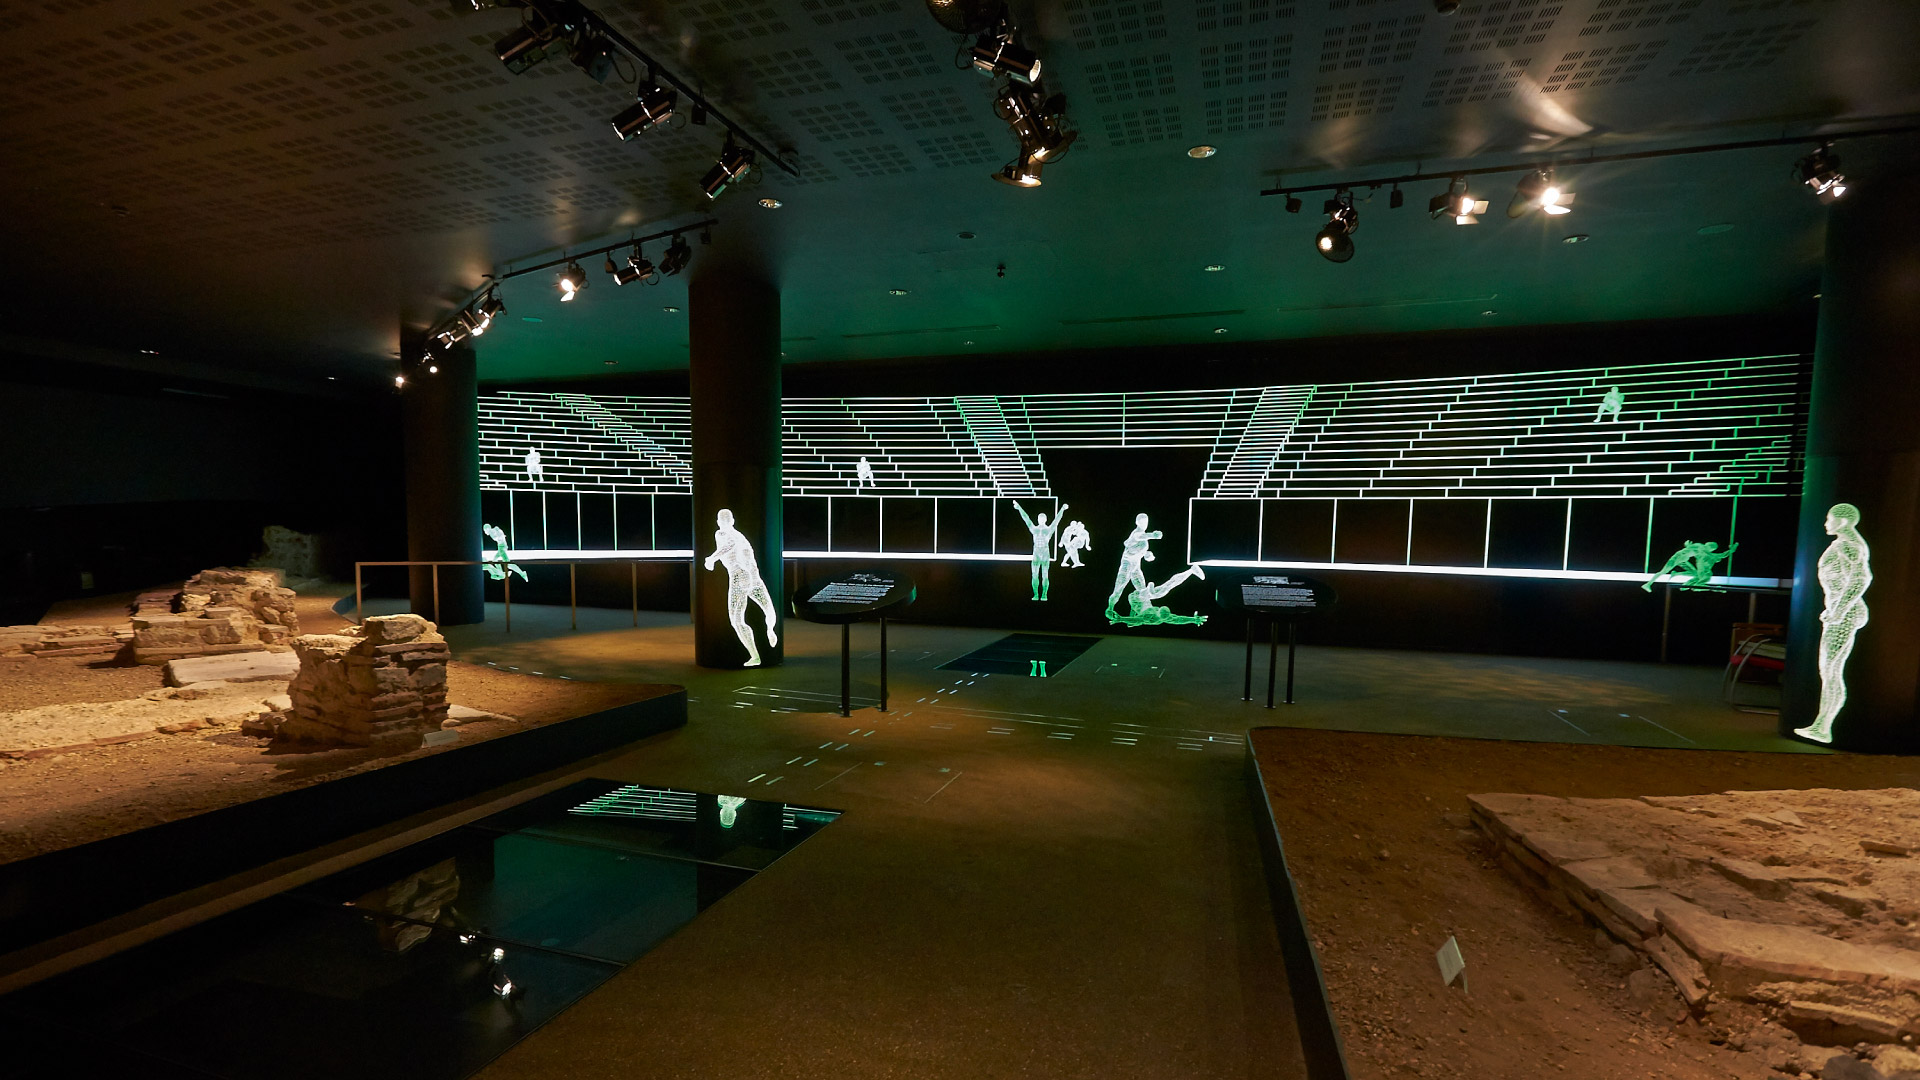 Family Fun Activities to Enjoy on the Weekend in the City of London - Roman ruins of an amphitheatre in a dark room with lit figures around the room doing traditionally roman sports actvities